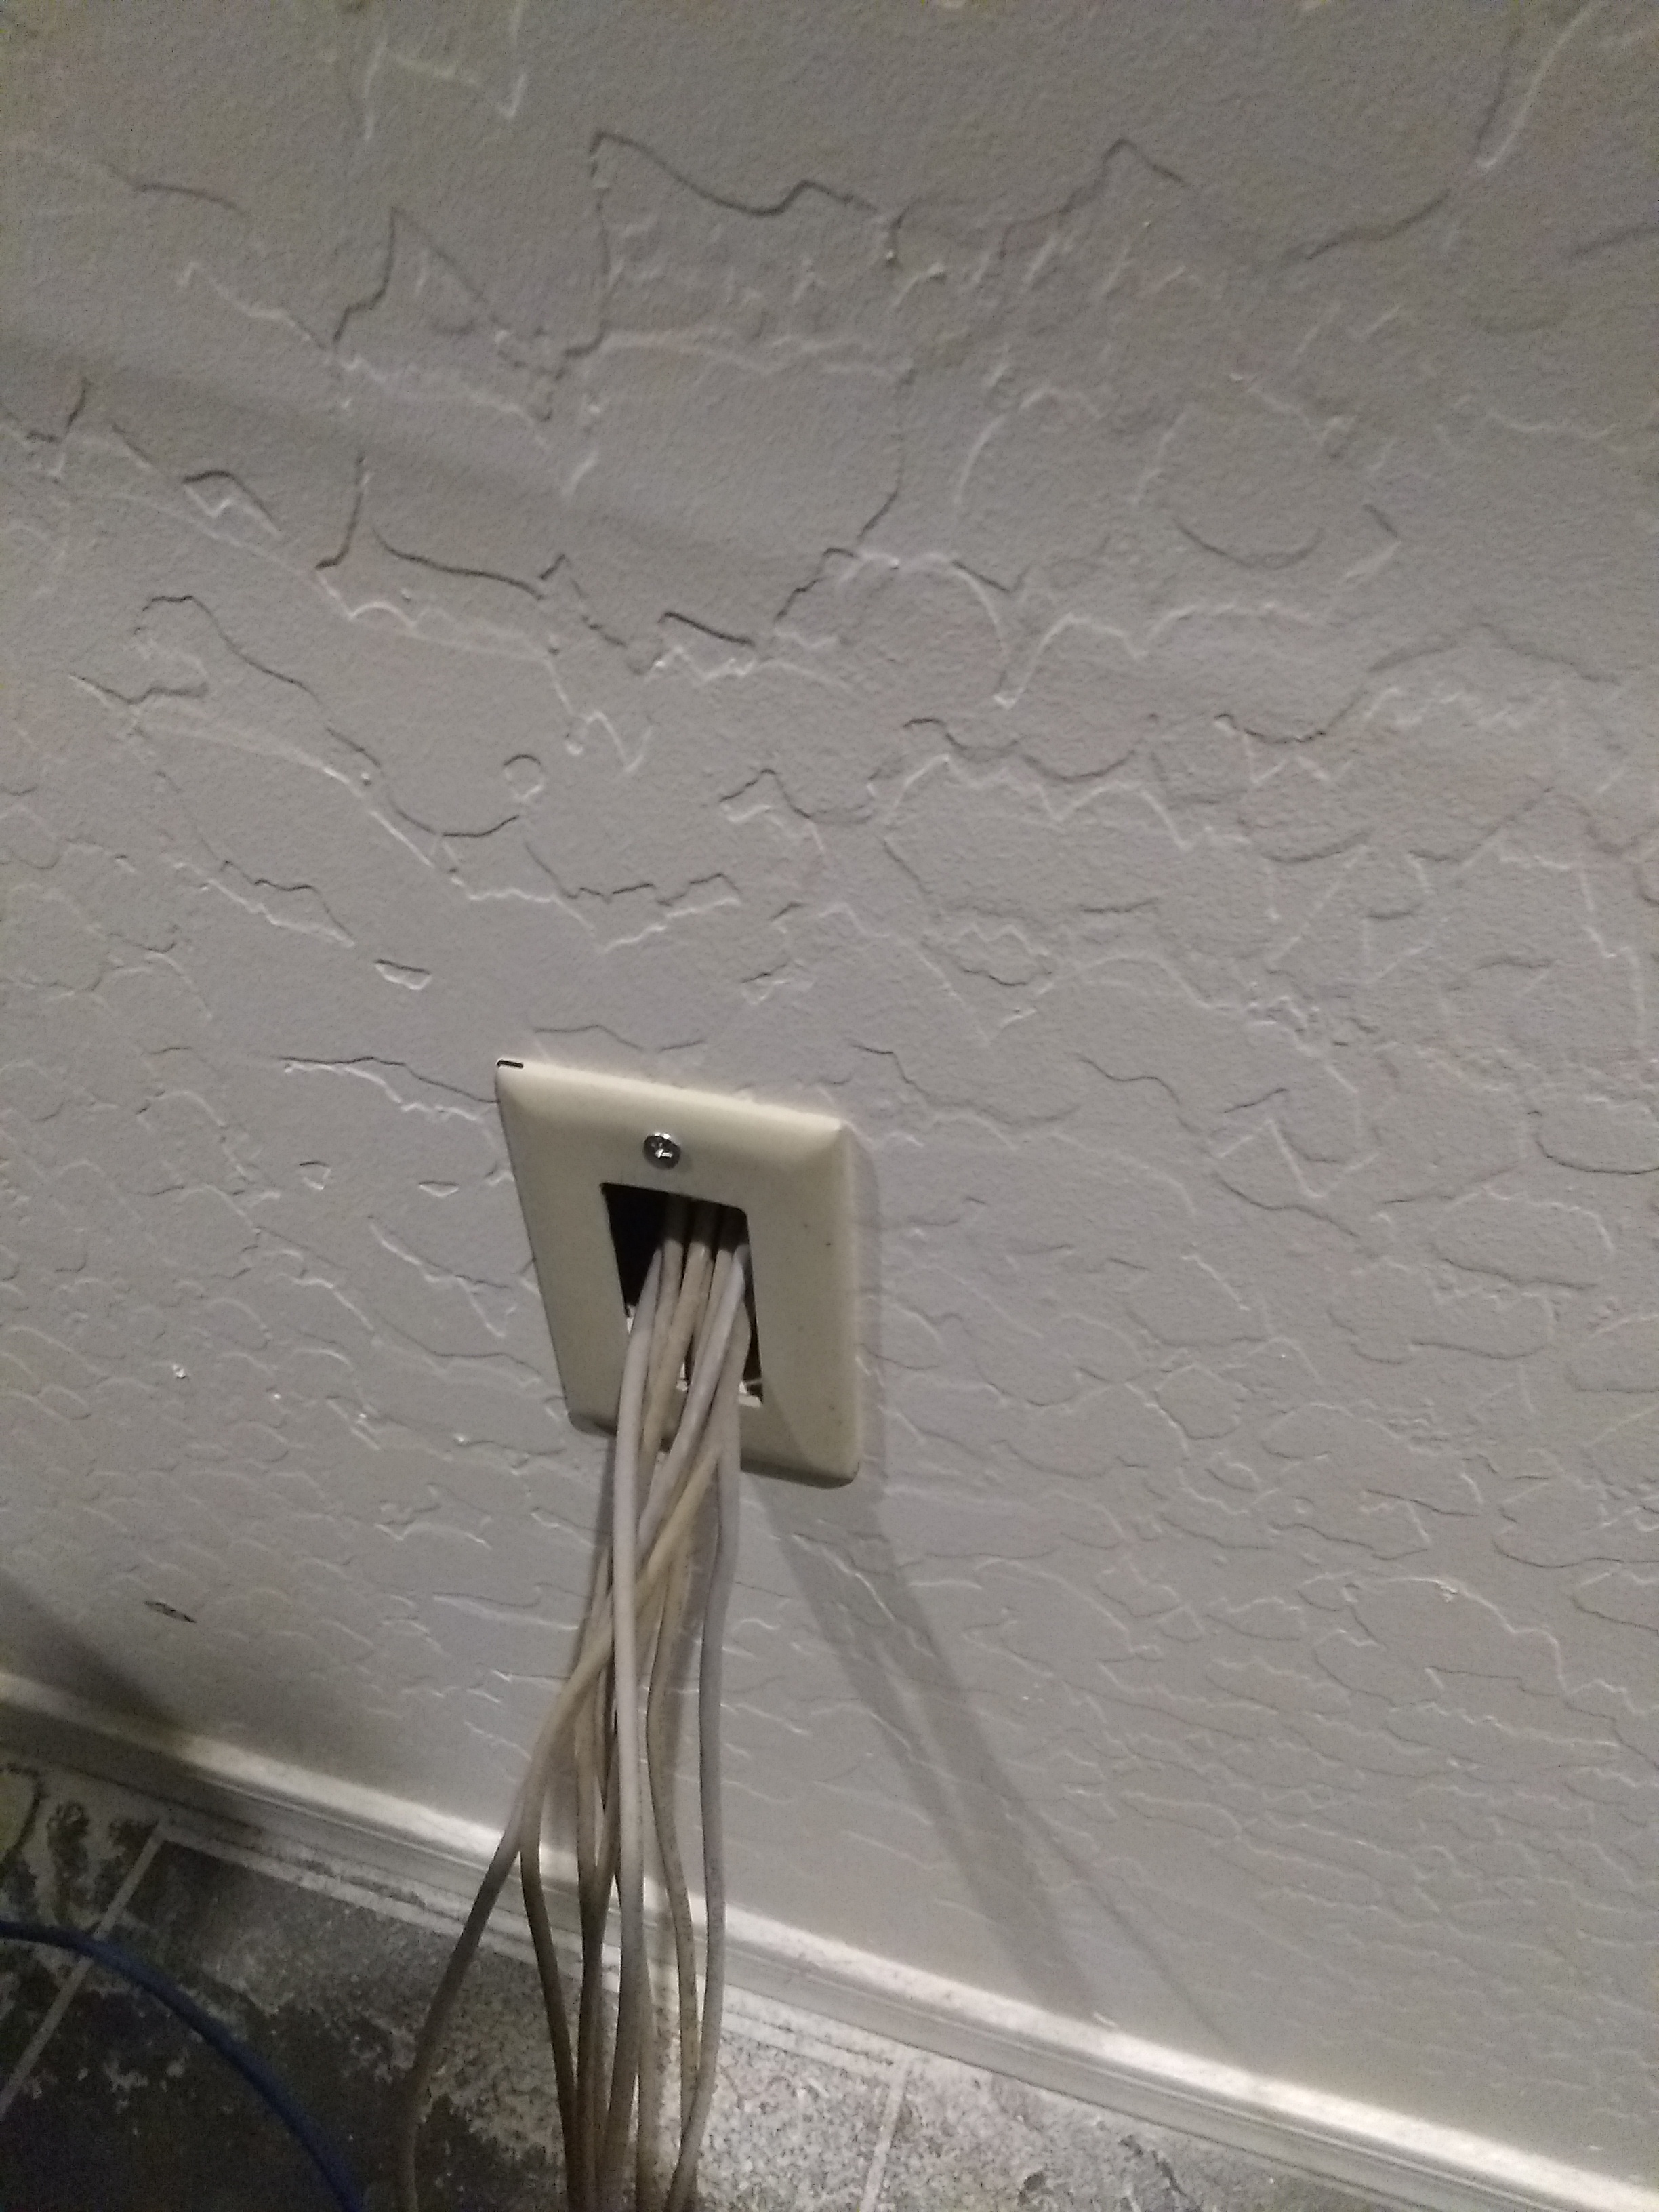 Bottom of wall where cables connected to DVR